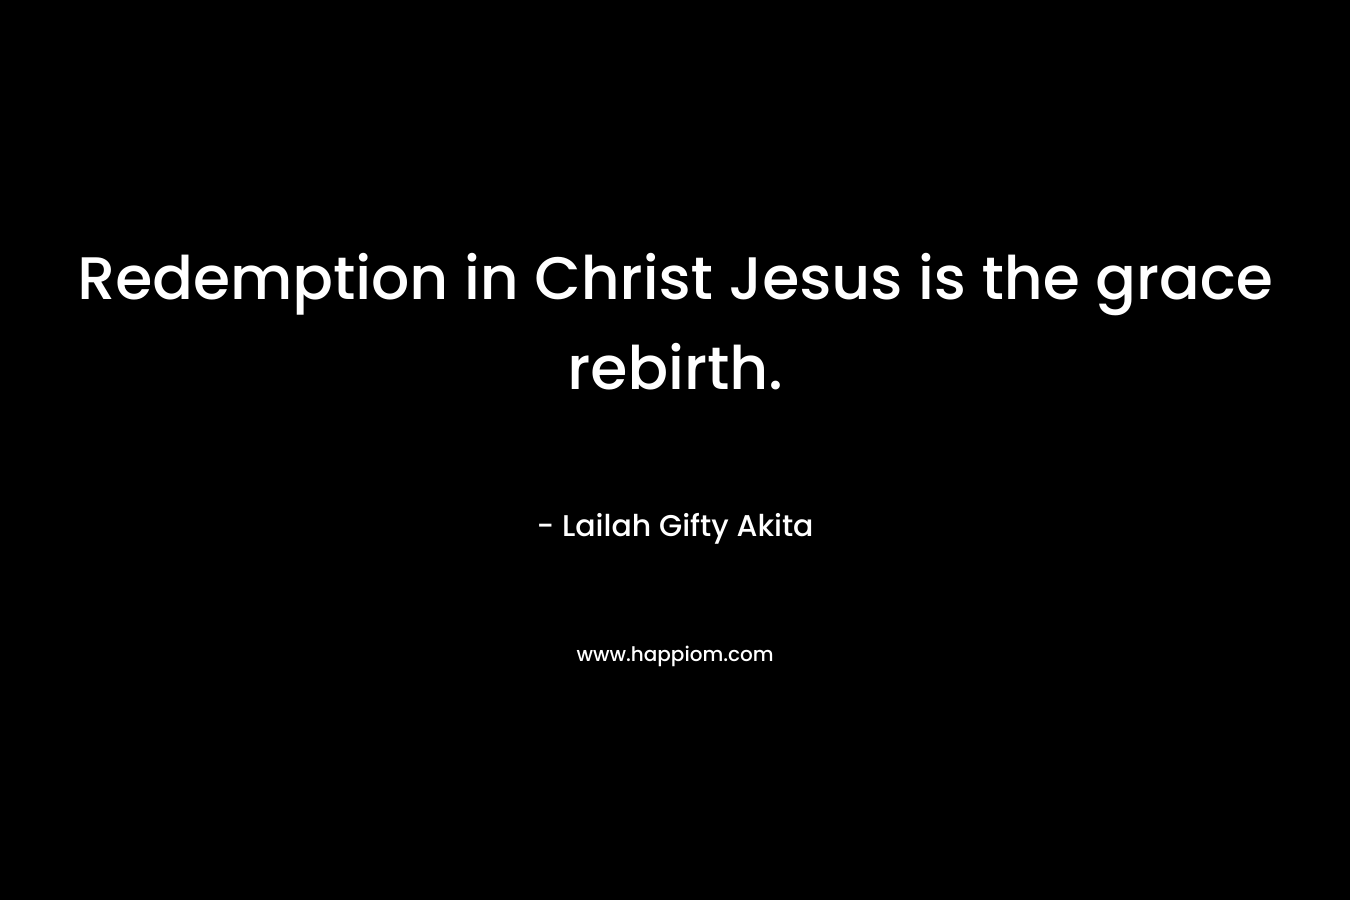 Redemption in Christ Jesus is the grace rebirth.